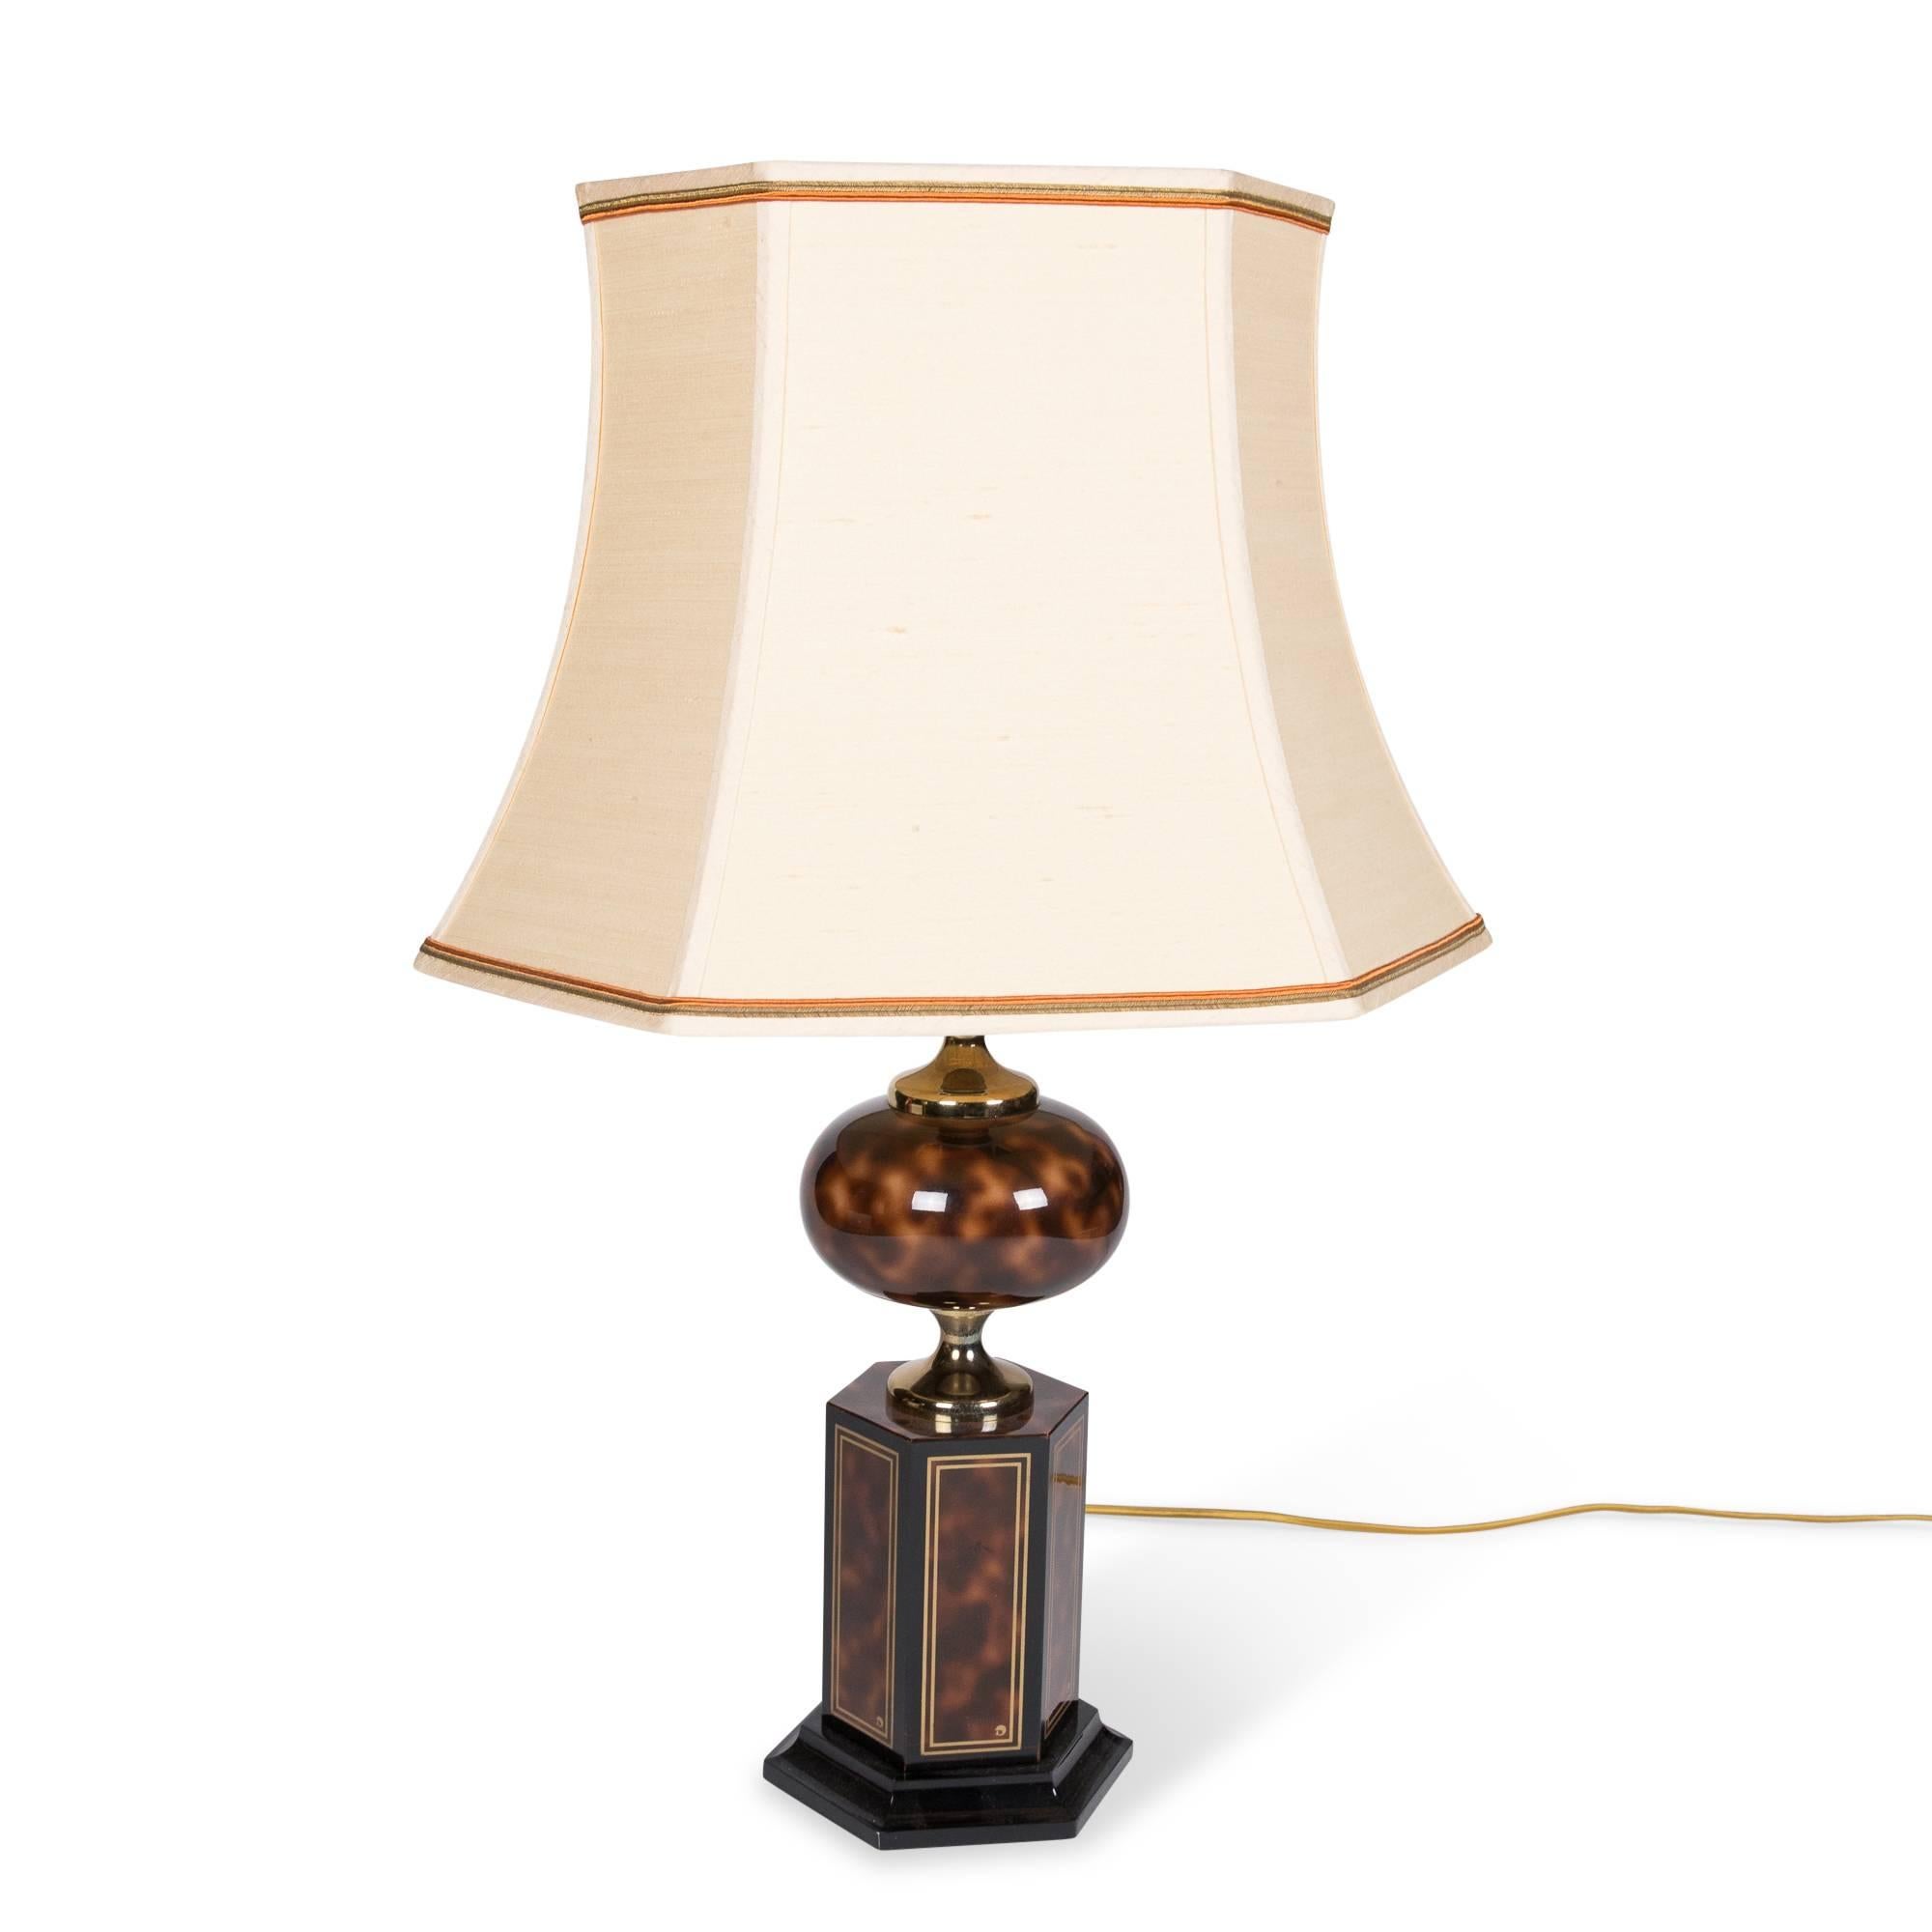 Faux tortoiseshell table lamp, with spherical element above hexagonal base, gold trim, on black lacquer base by Maison Jansen, France, 1970s. In original shade, overall height 26 1/2 in. Base measures 6 3/4 in x 6 in. Shade measures width 17 3/4 in,